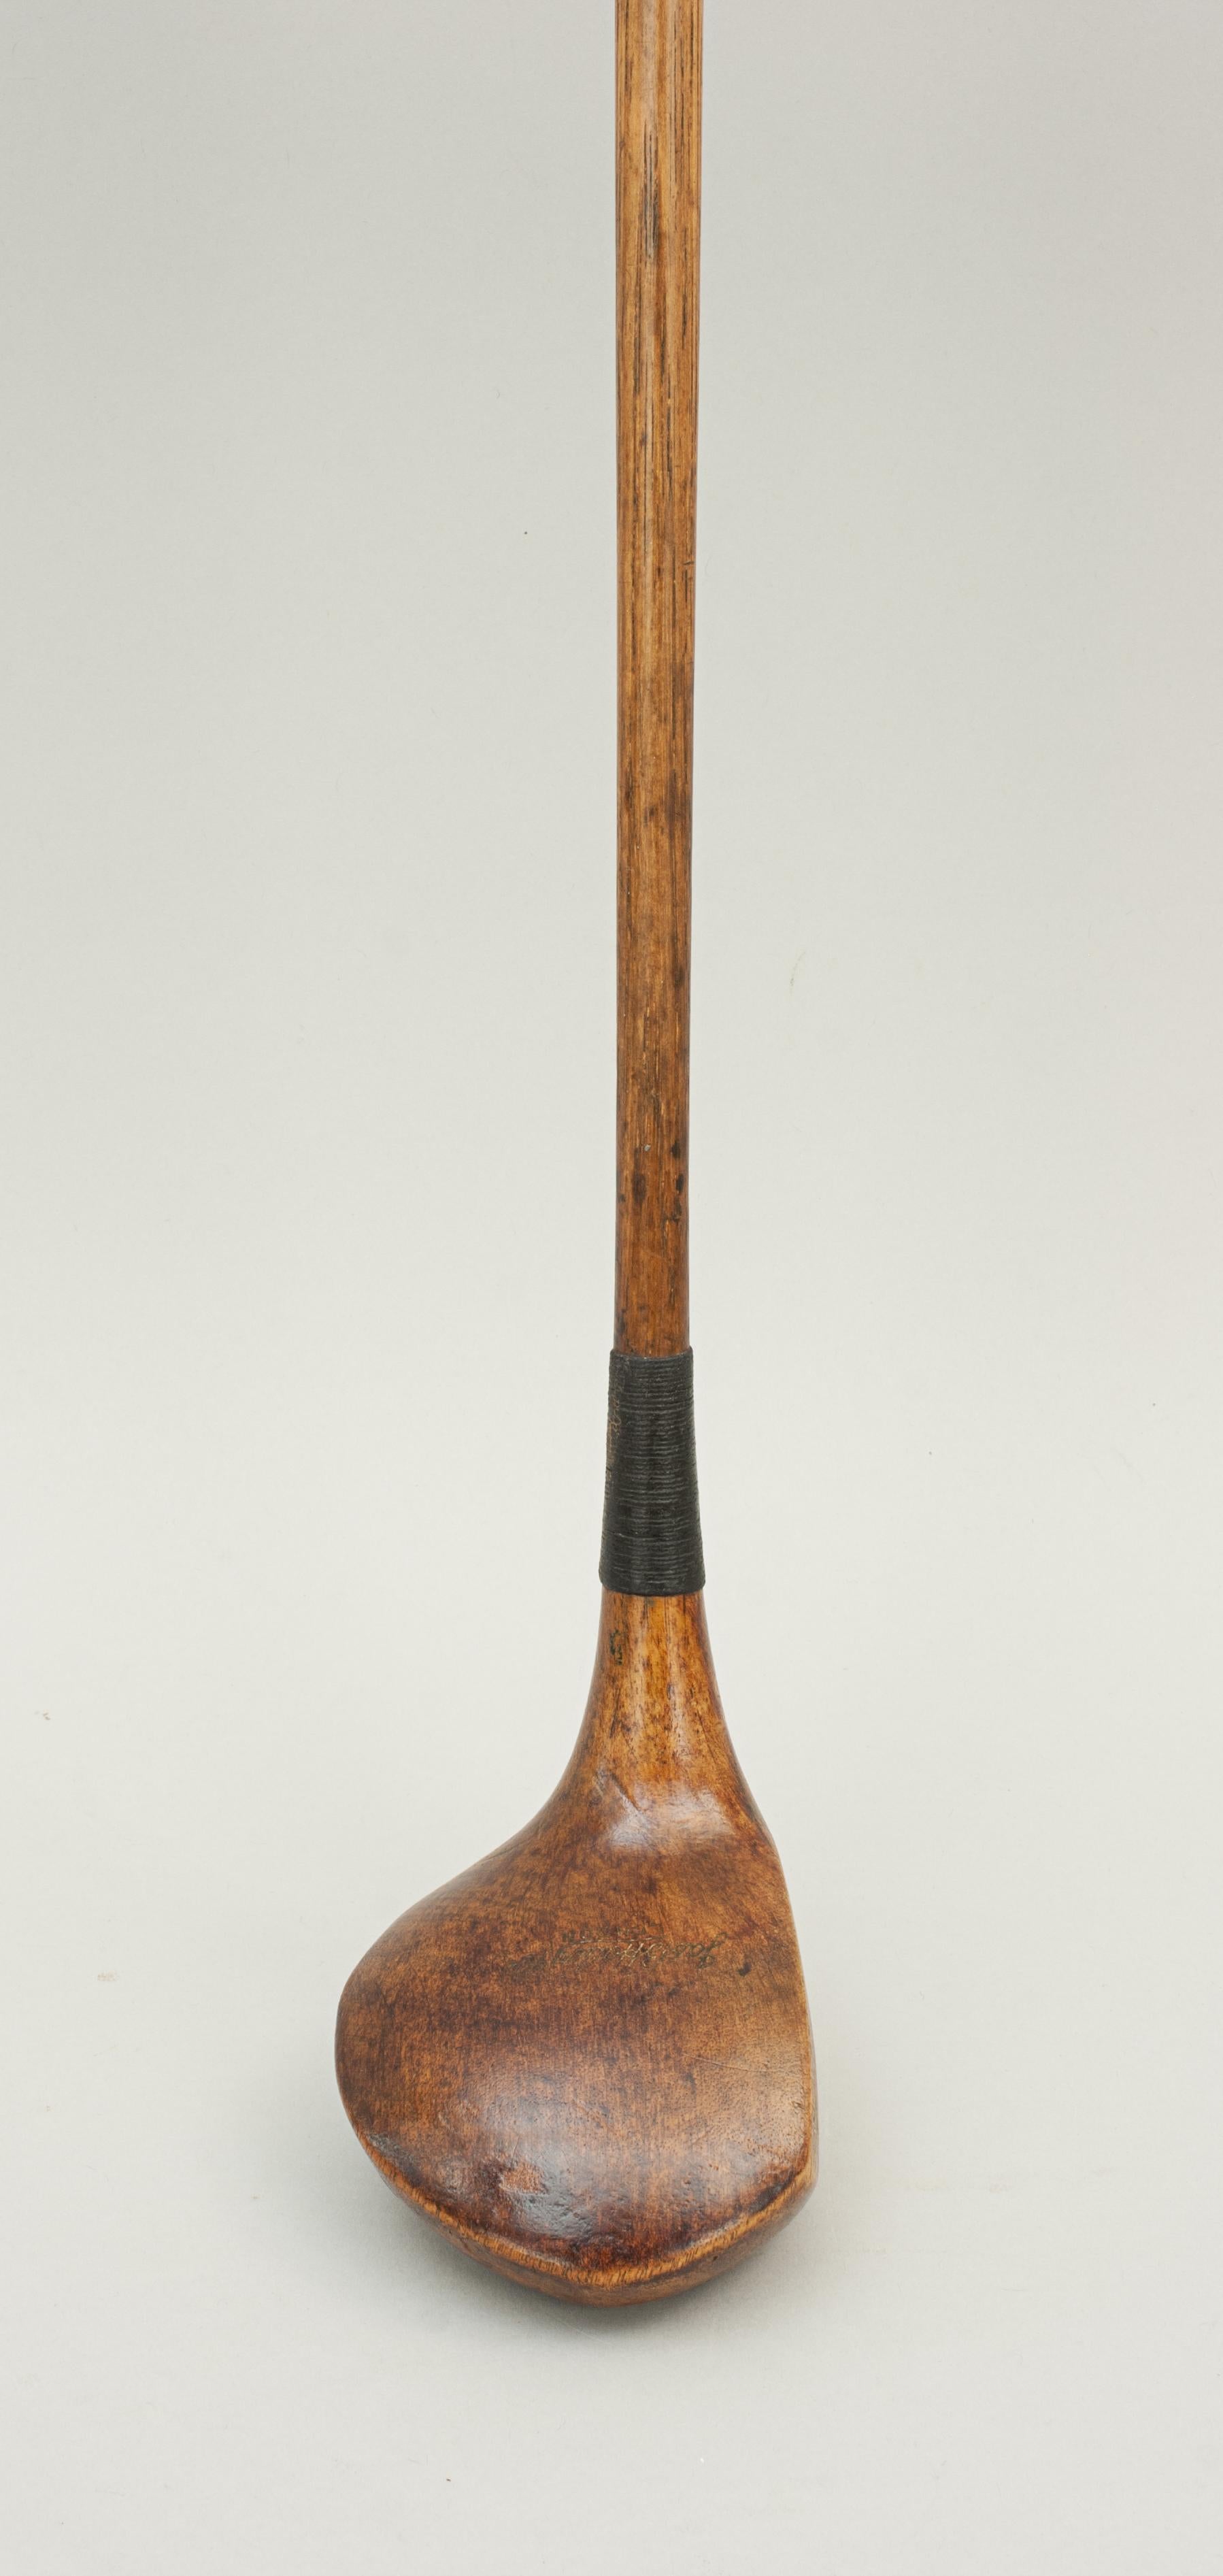 Golf Club, Hickory Driver, James B. Halley & Co.
A good persimmon wood driver by James B. Halley & Co. The club has a hickory shaft with a polished leather grip. The head is marked with 'Jas B. Halley & Co. London' and has a lead weight to the rear